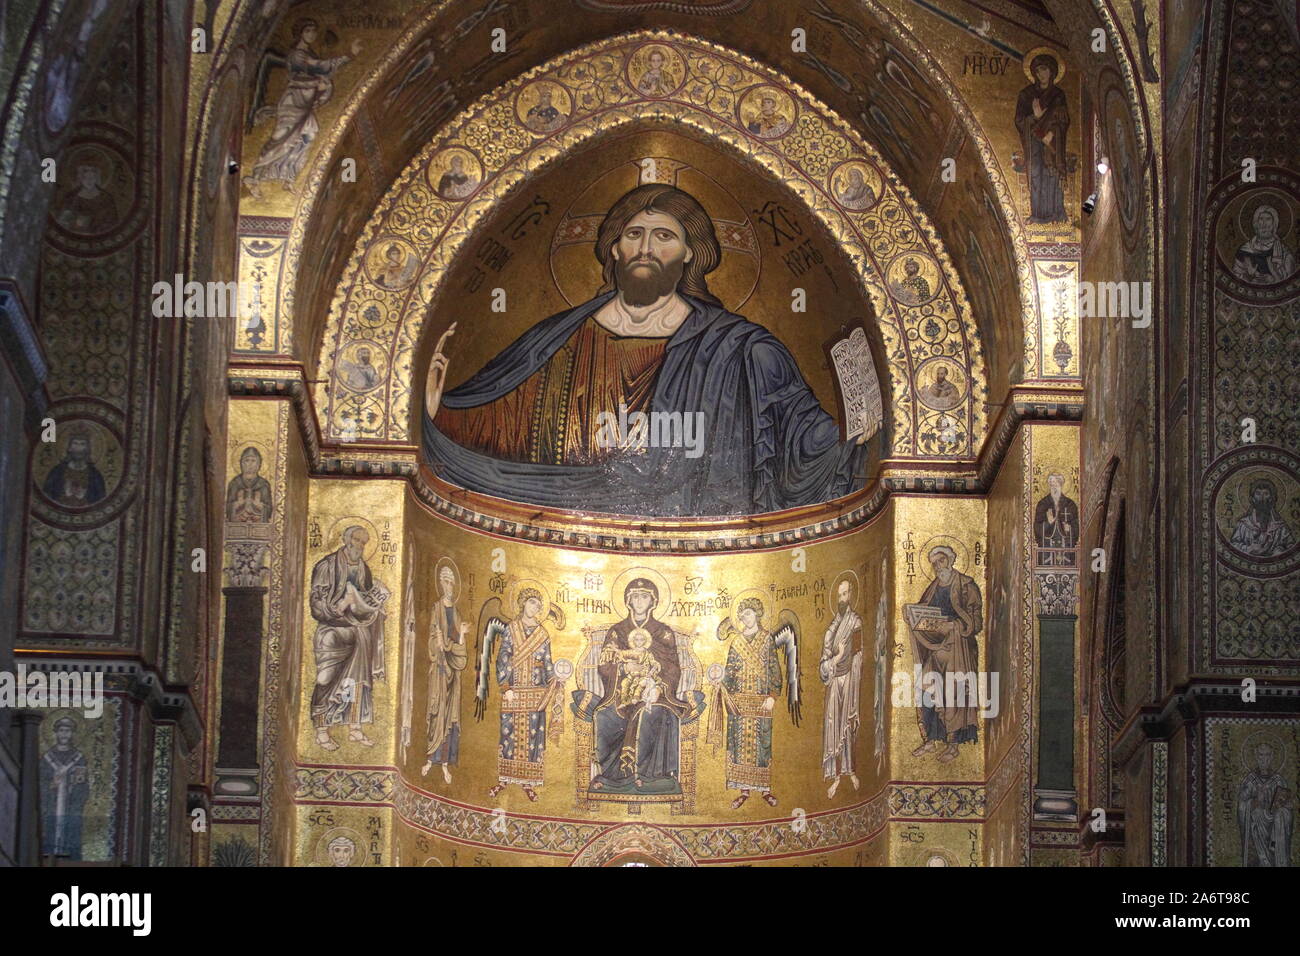 Monreale, Italy - 3 July 2016: The Christ Pantocrator in the Cathedral of Monreale Stock Photo